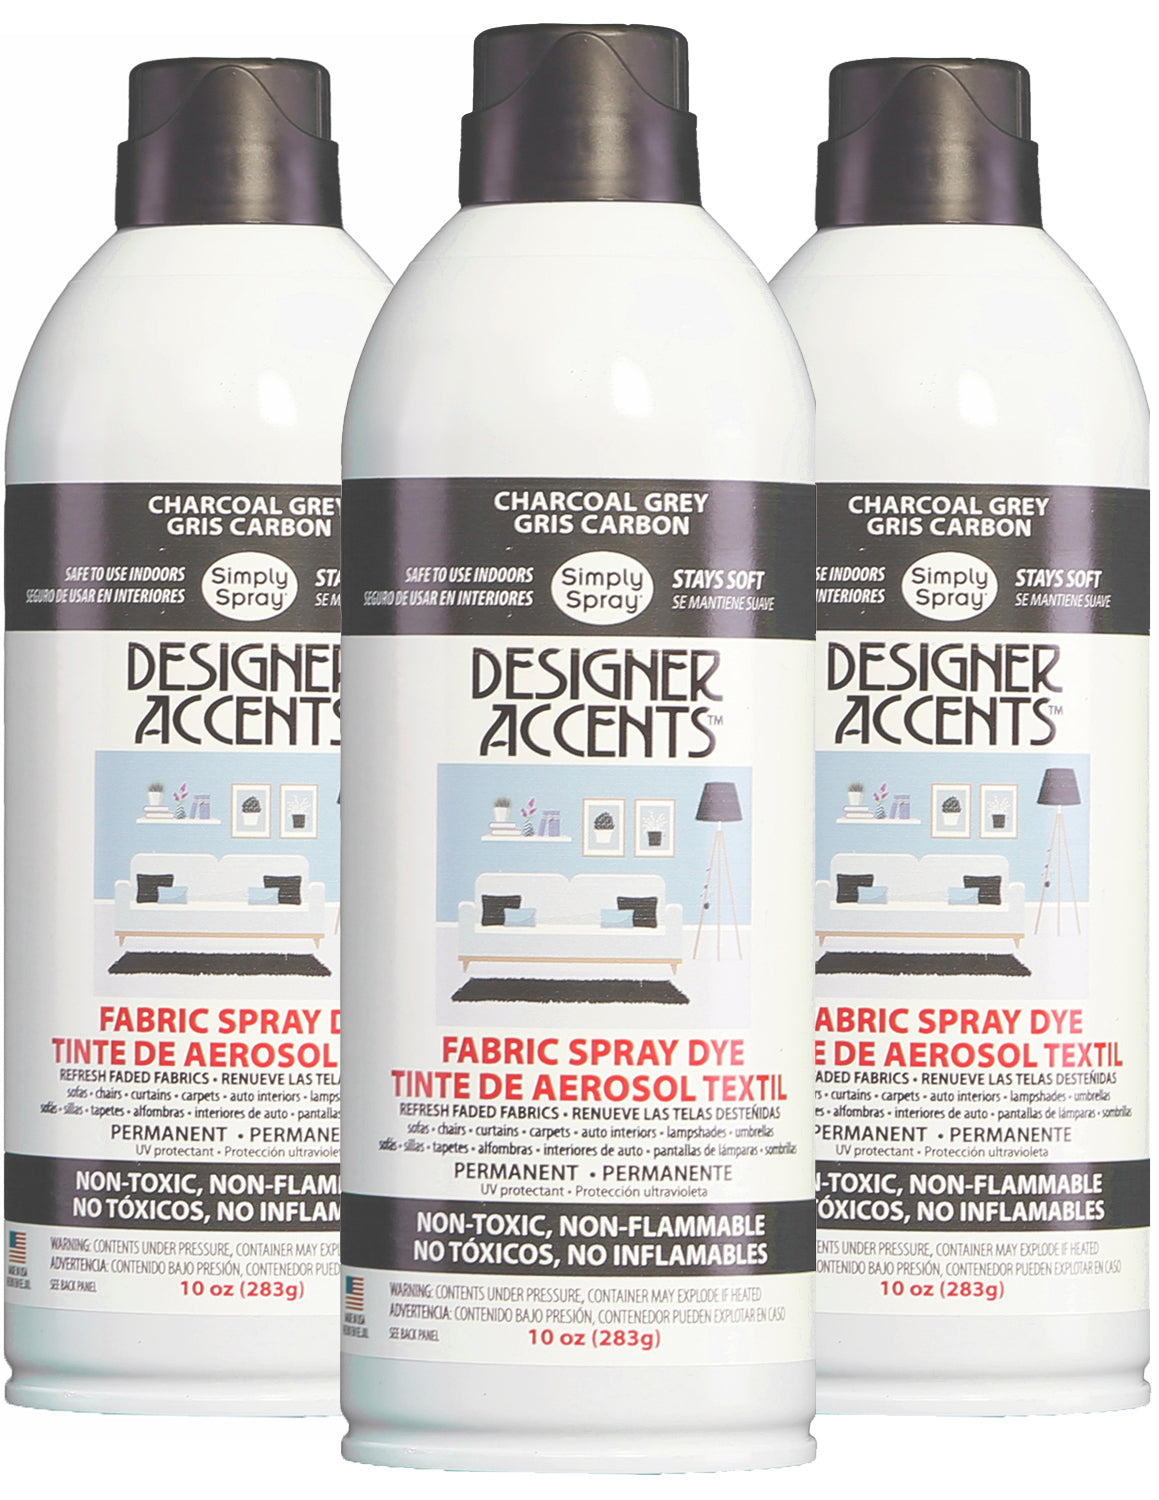 Designer Accents Fabric Paint Spray Dye by Simply Spray - Charcoal Grey